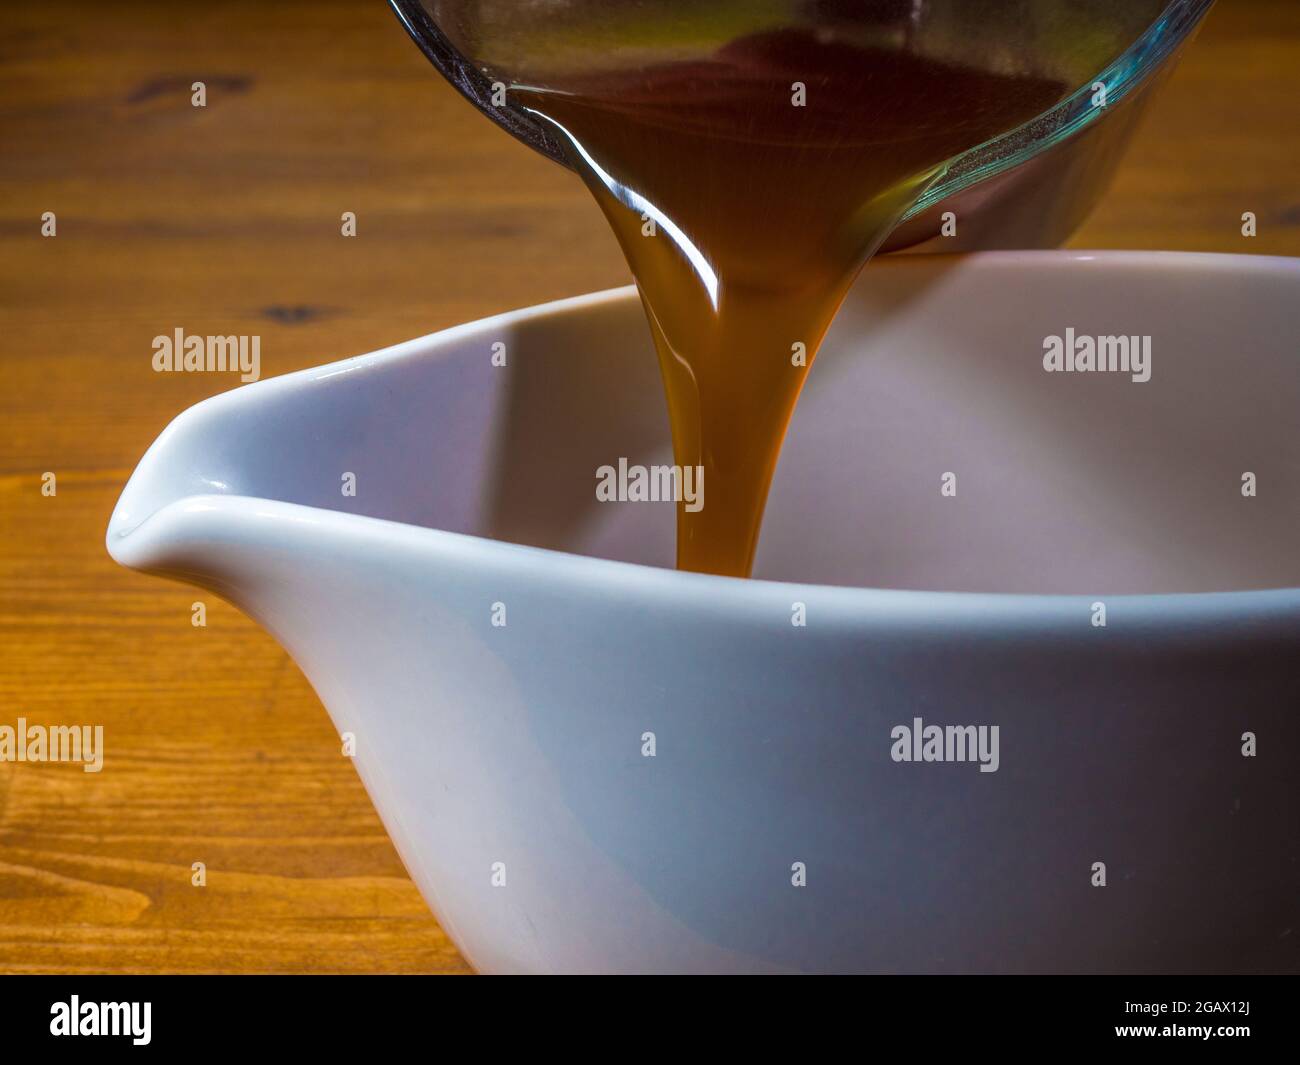 Closeup POV shot of hot gravy strarting to be poured from a glass measuring jug into a serving boat. Stock Photo